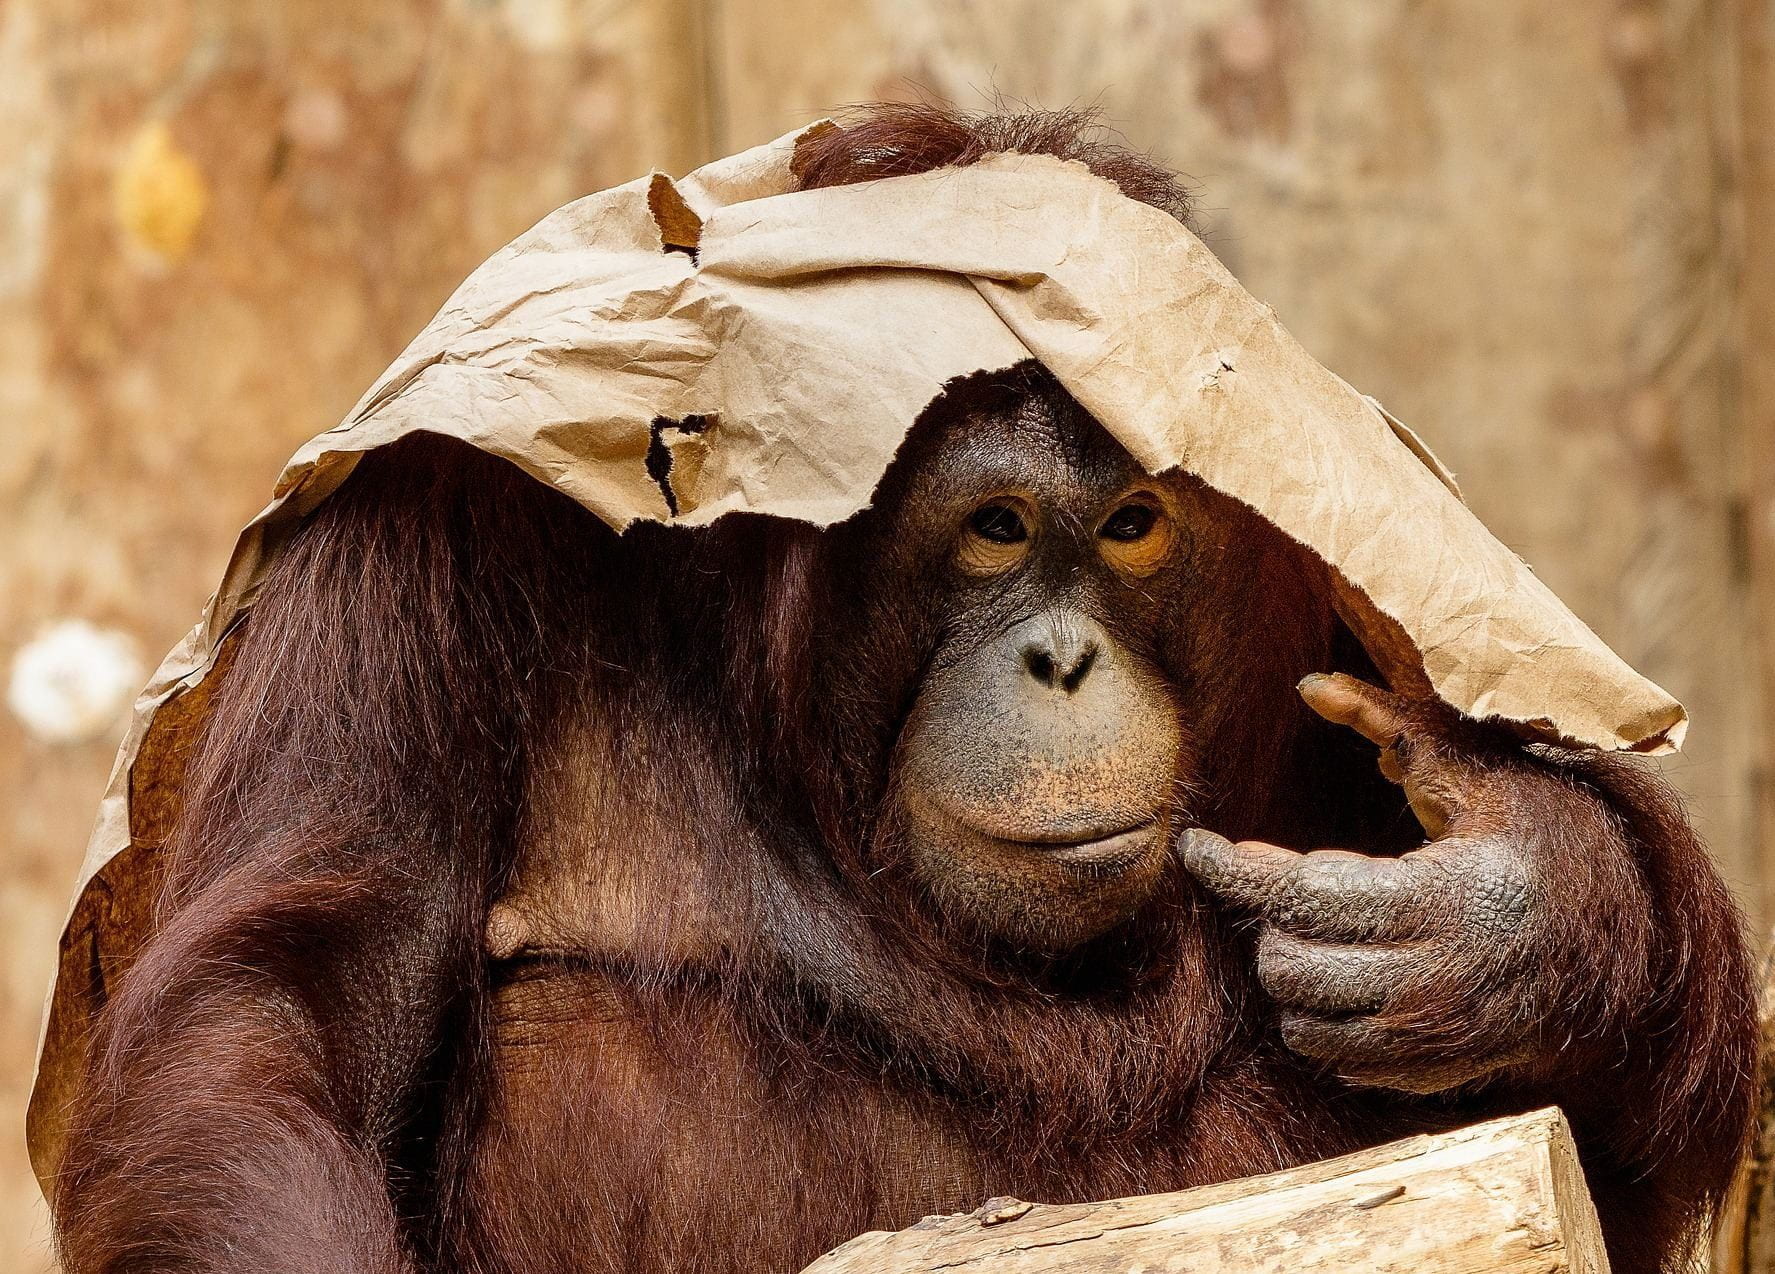 An orangutan with a ripped paper bag on her head acting as a hat.